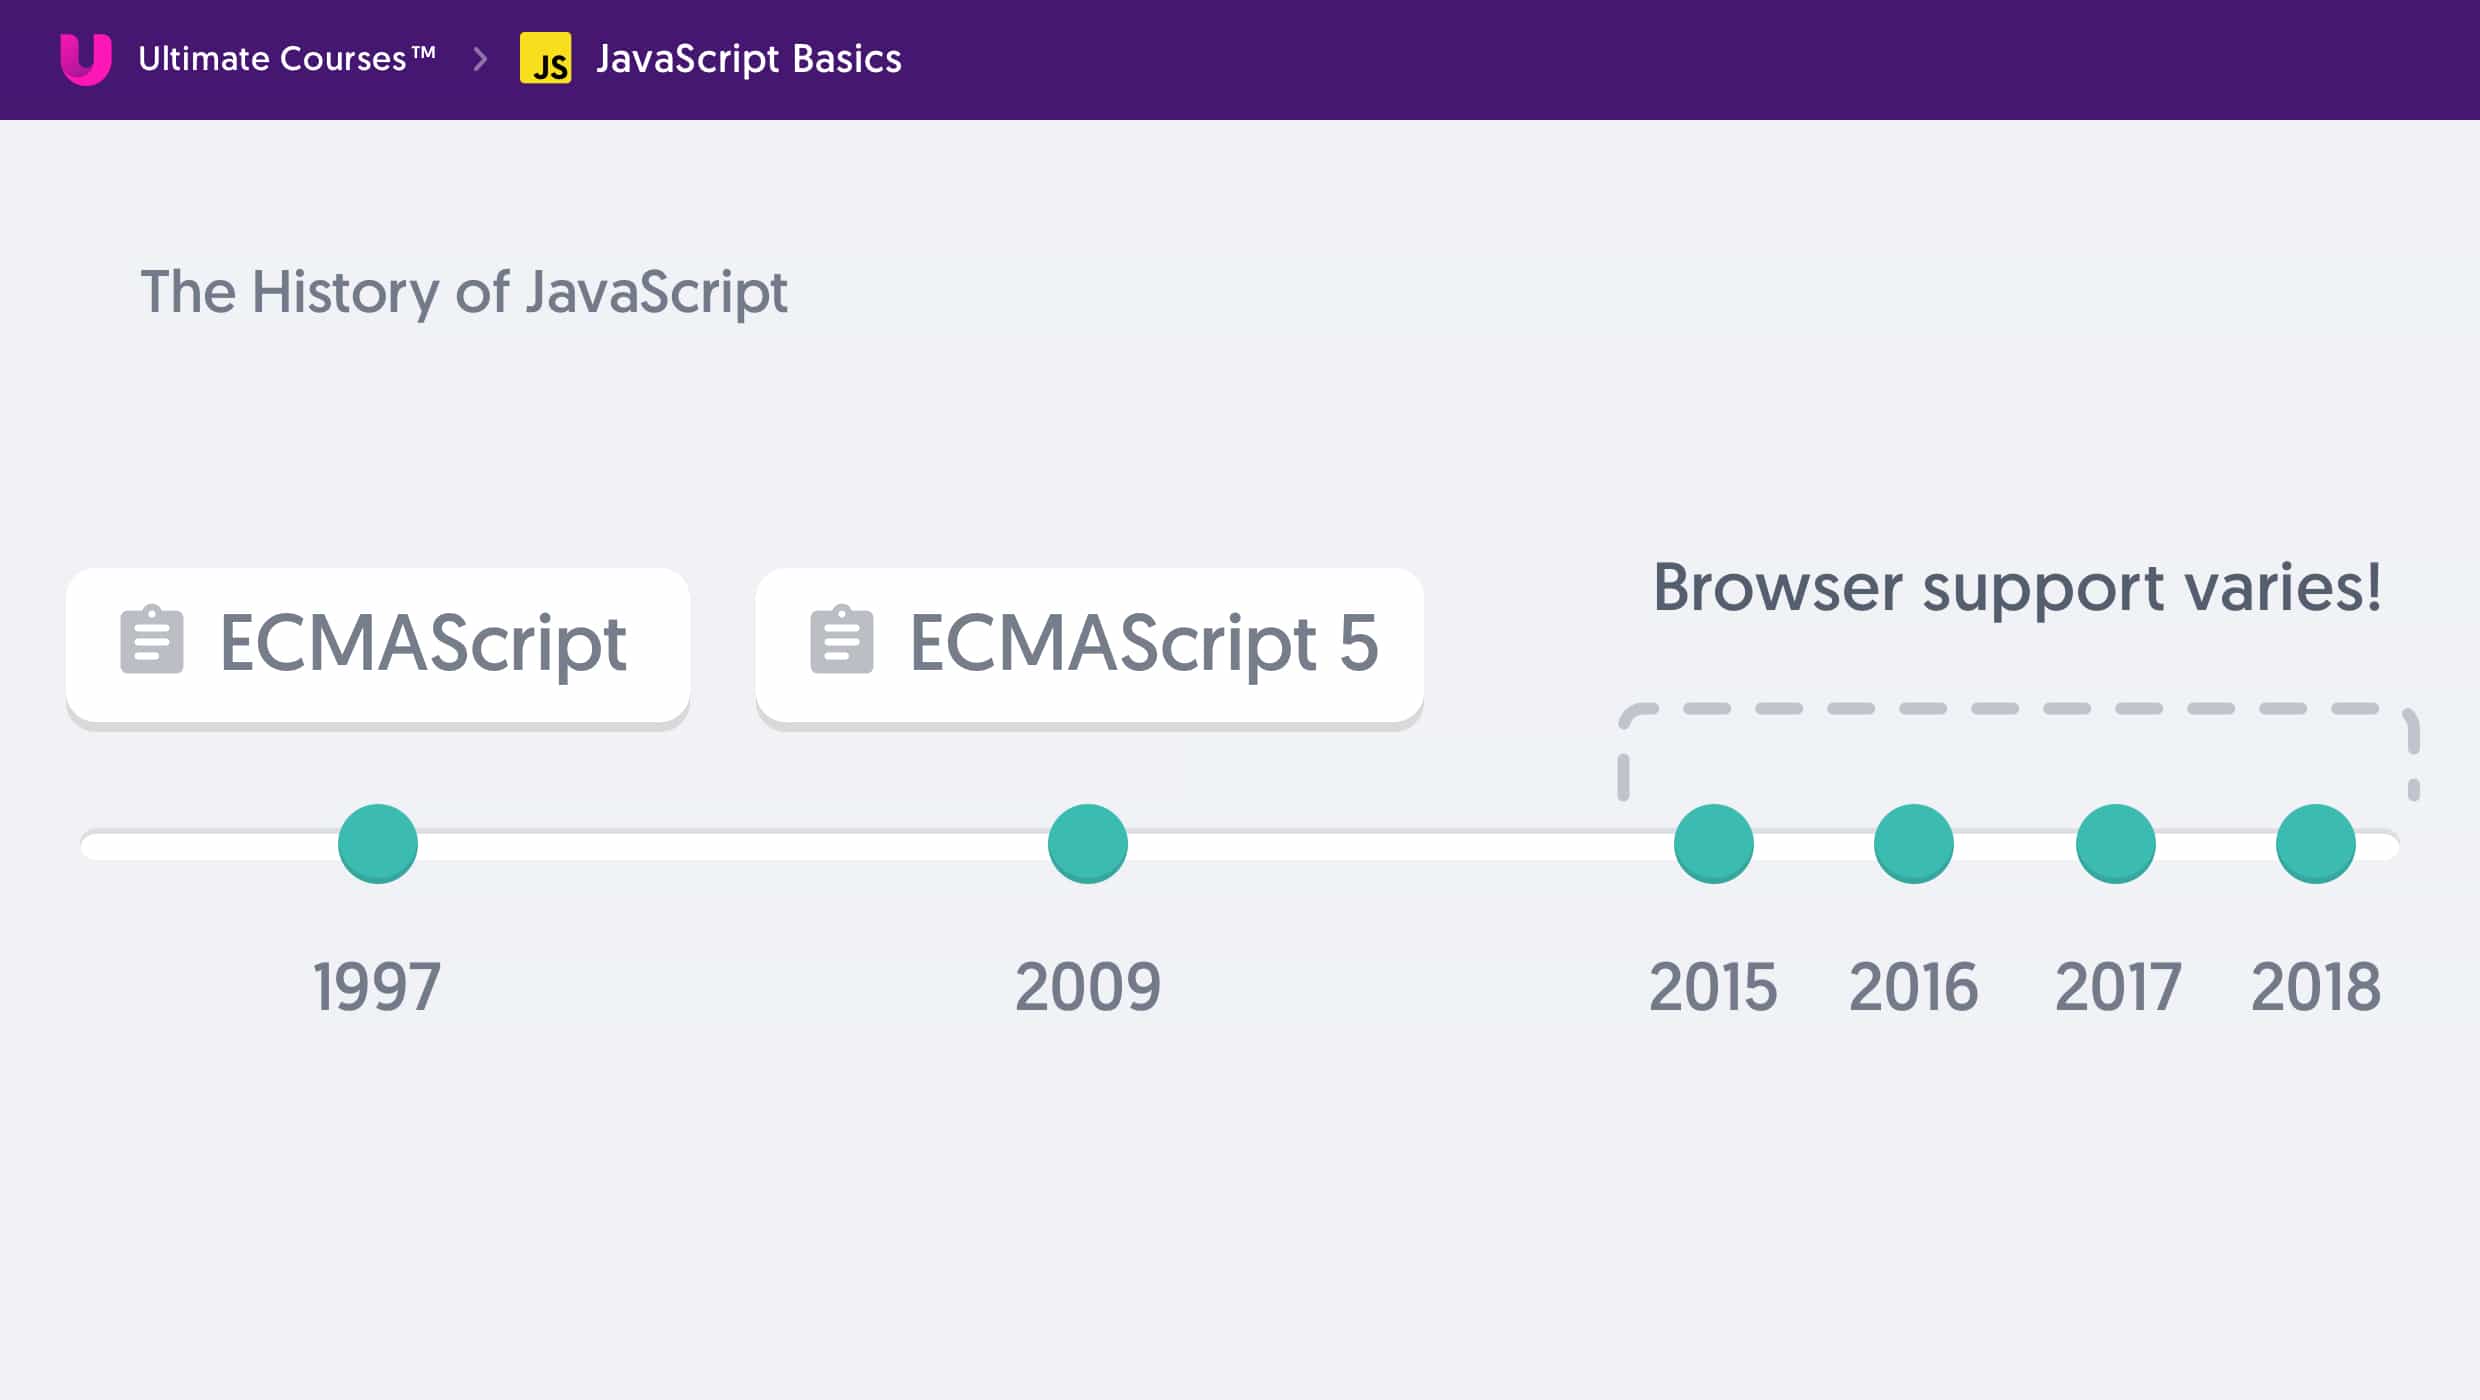 JavaScript's History timeline showing ECMAScript versions and how their years affect the browser support